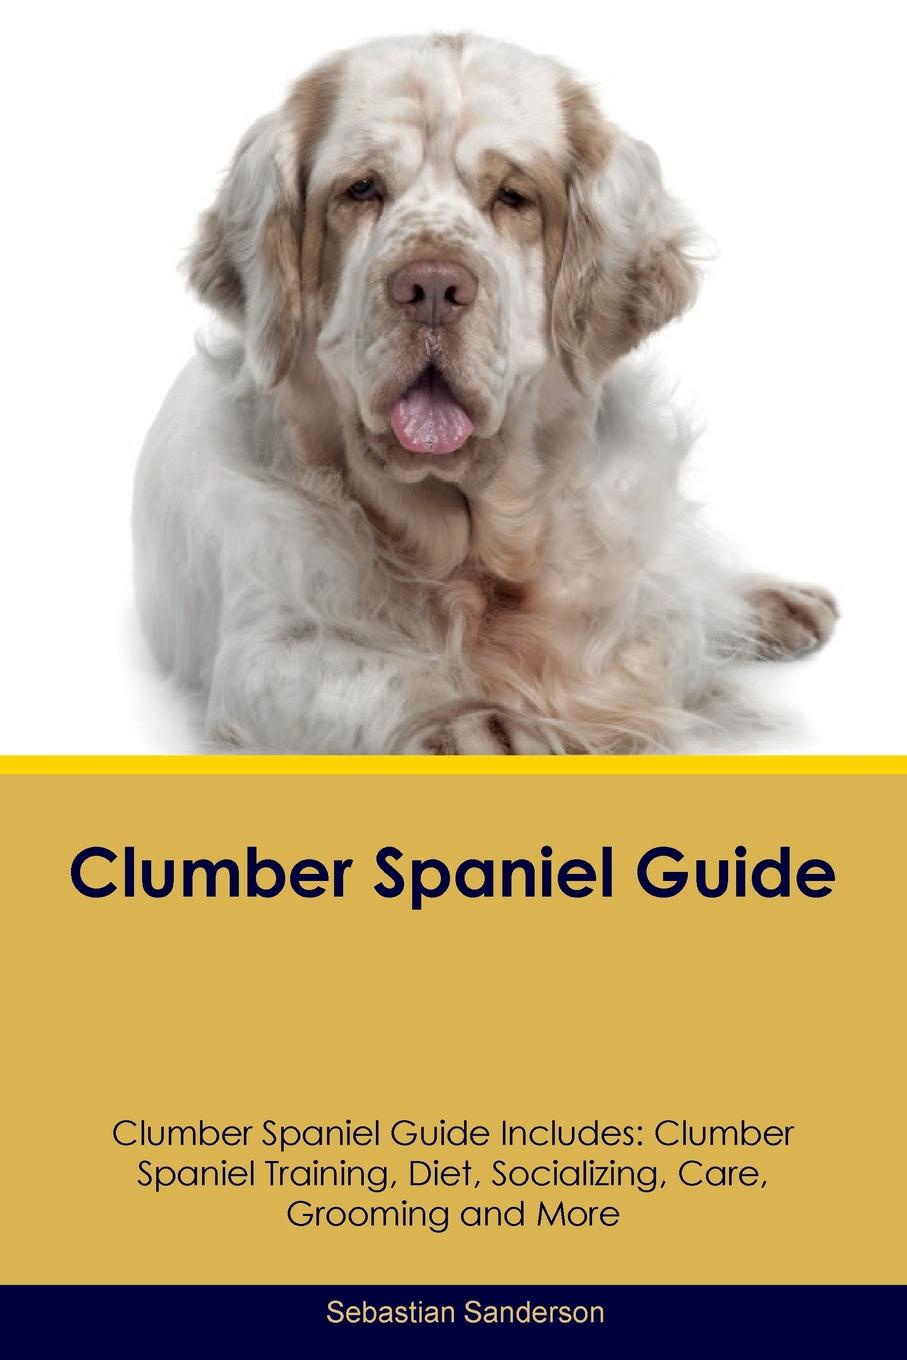 Clumber Spaniel Guide Clumber Spaniel Guide Includes. Clumber Spaniel Training, Diet, Socializing, Care, Grooming, Breeding and More